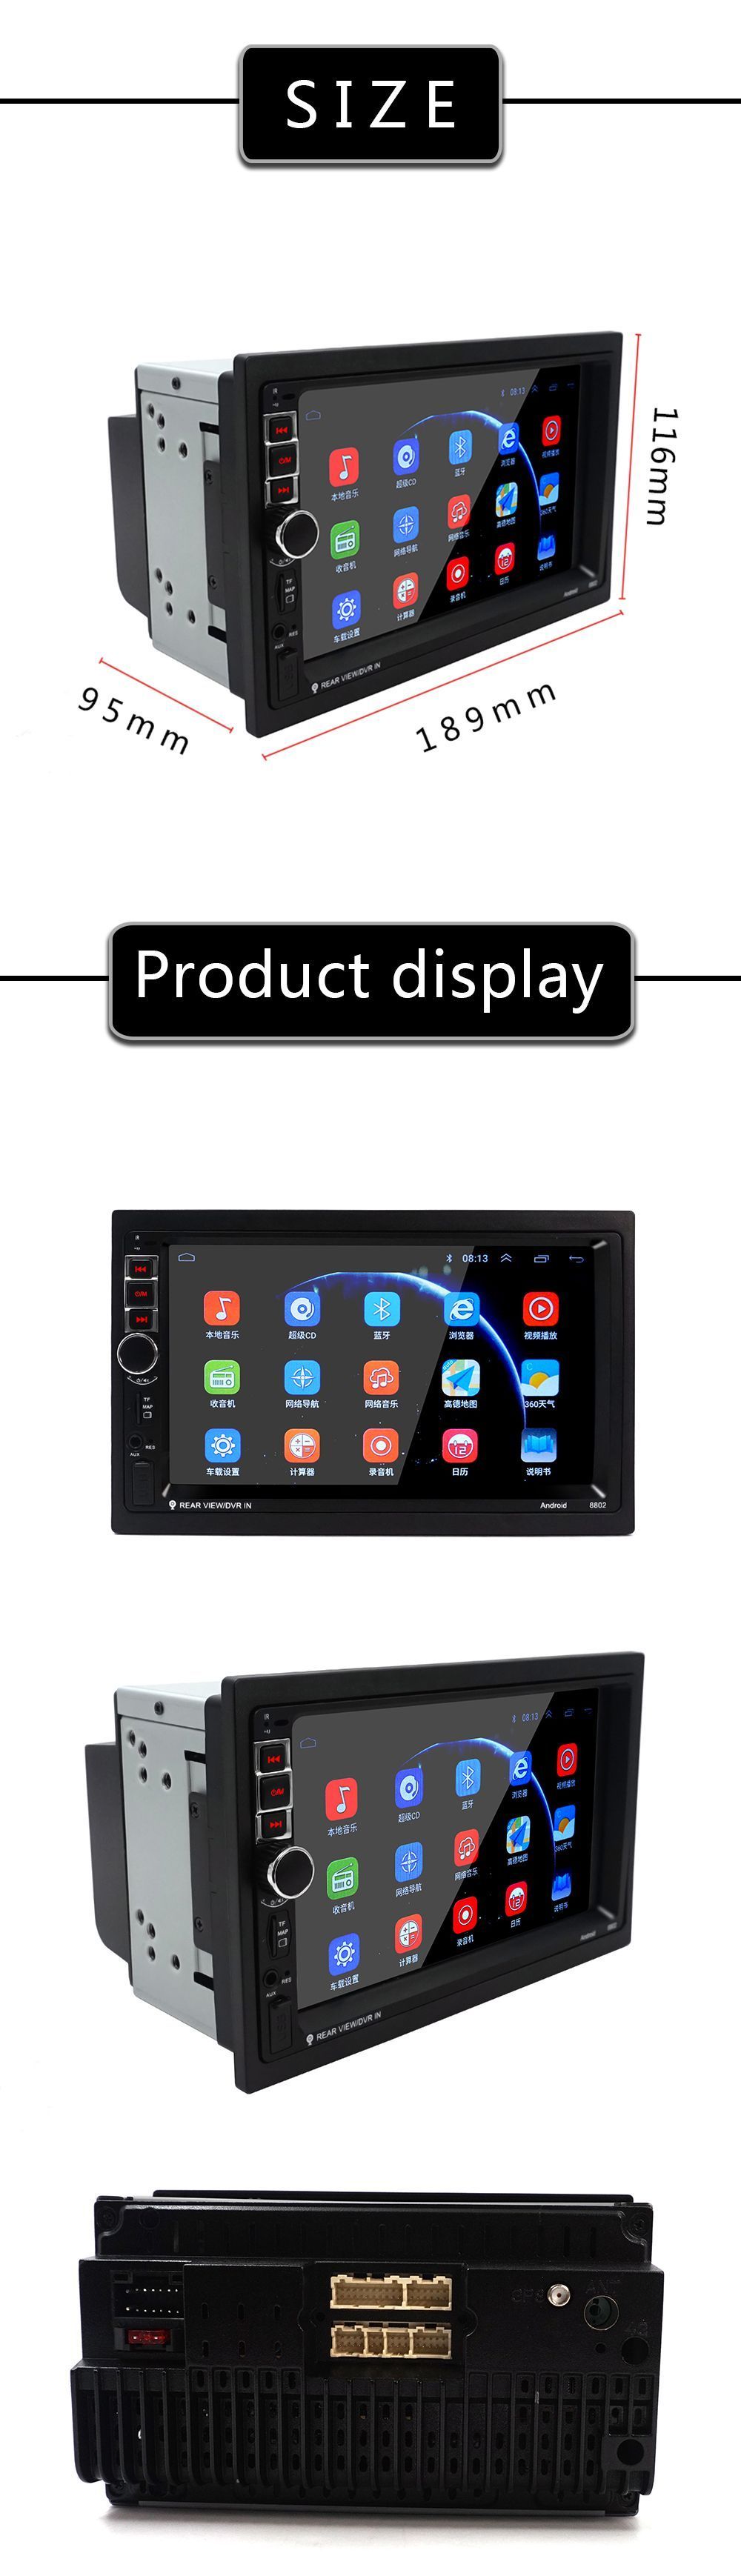 7-Inch-2-Din-for-Android-81-Car-MP5-Player-1GB16GB-Stereo-Radio-WIFI-3G-GPS-FM-bluetooth-TF-Card-USB-1573204